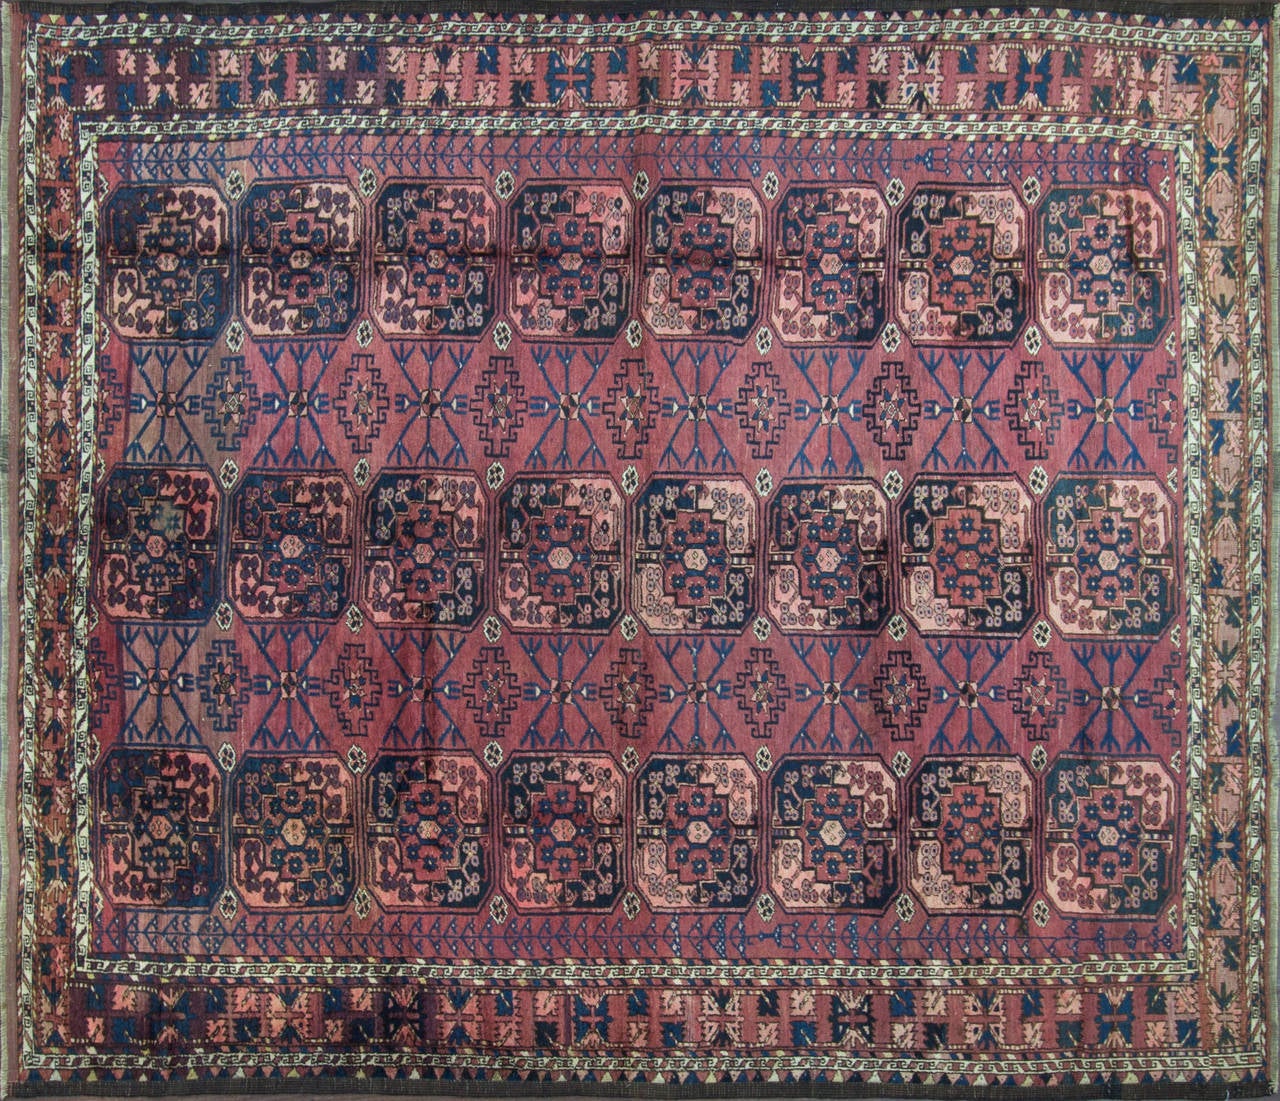 The Ersari Tribe includes the Beshir, Charshango and Kizil Ayak as Sub groups. The Ersari Tribe and other Turkoman groups began moving into the North-Eastern Afghanistan from early 17th century and they continued their weaving Craft. Most rugs from